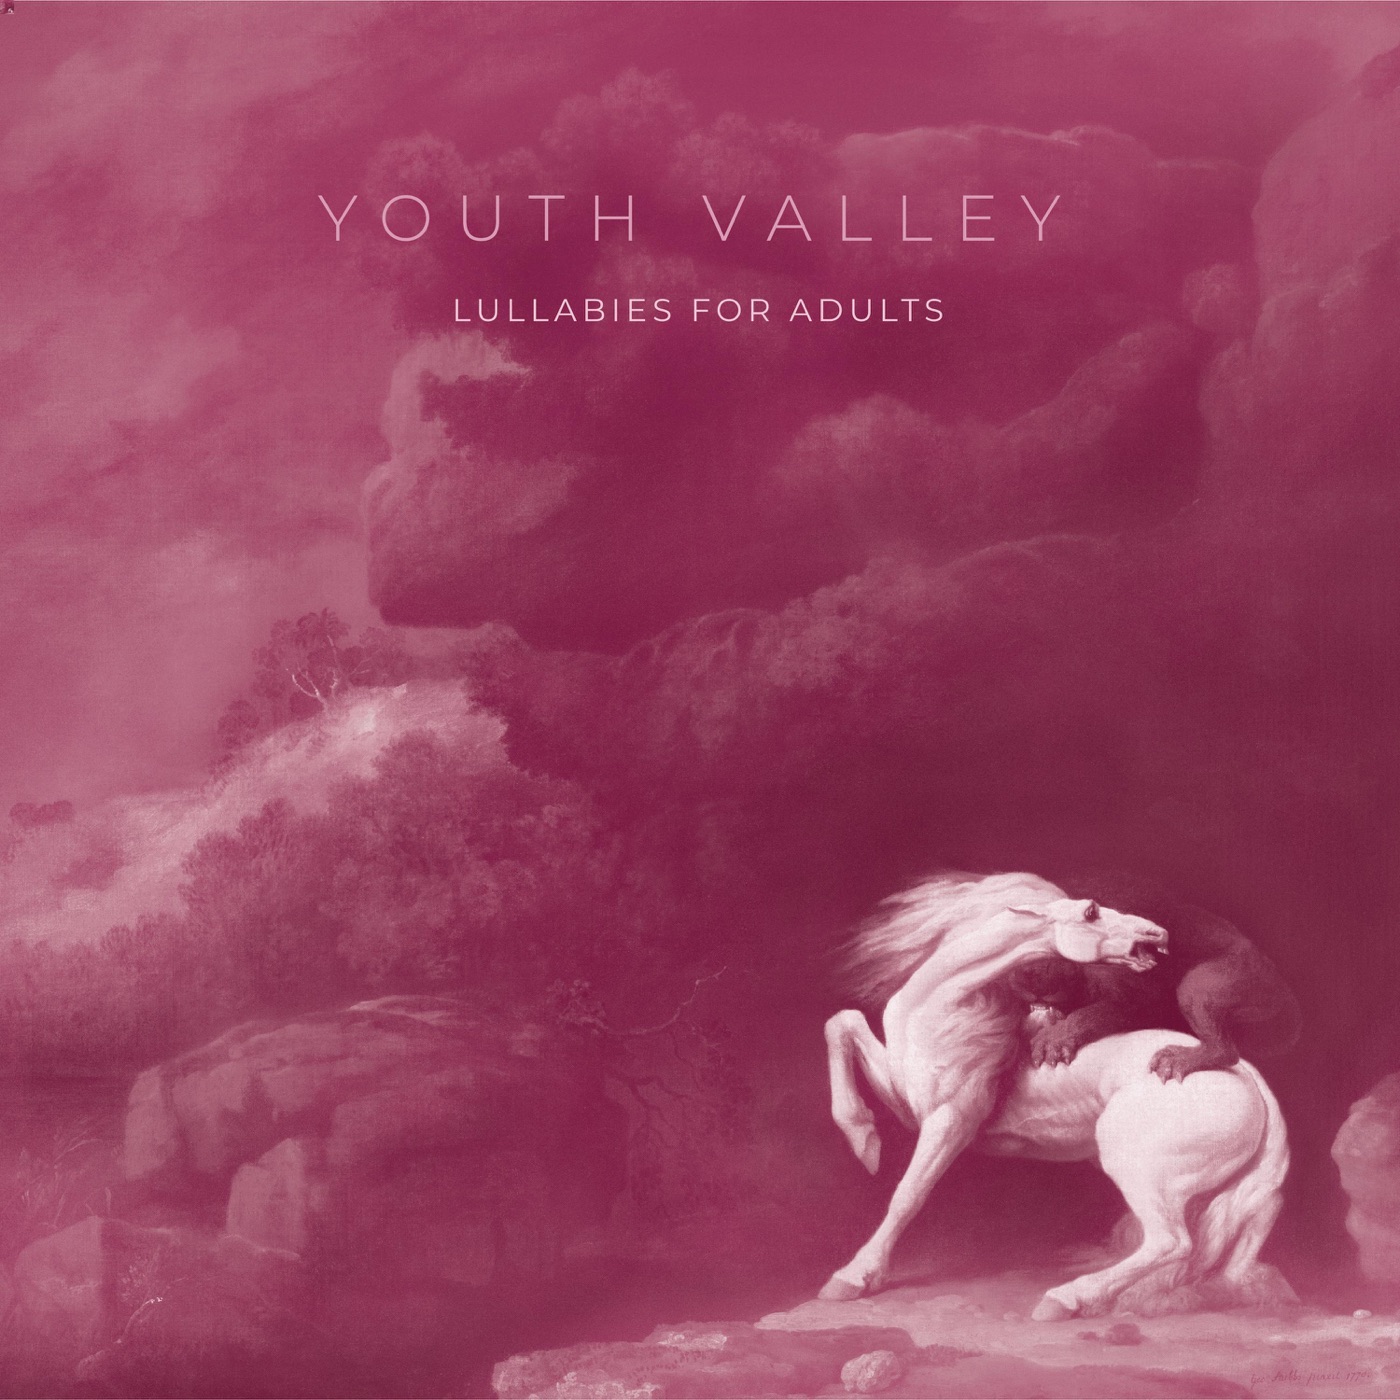 Lullabies For Adults by Youth Valley